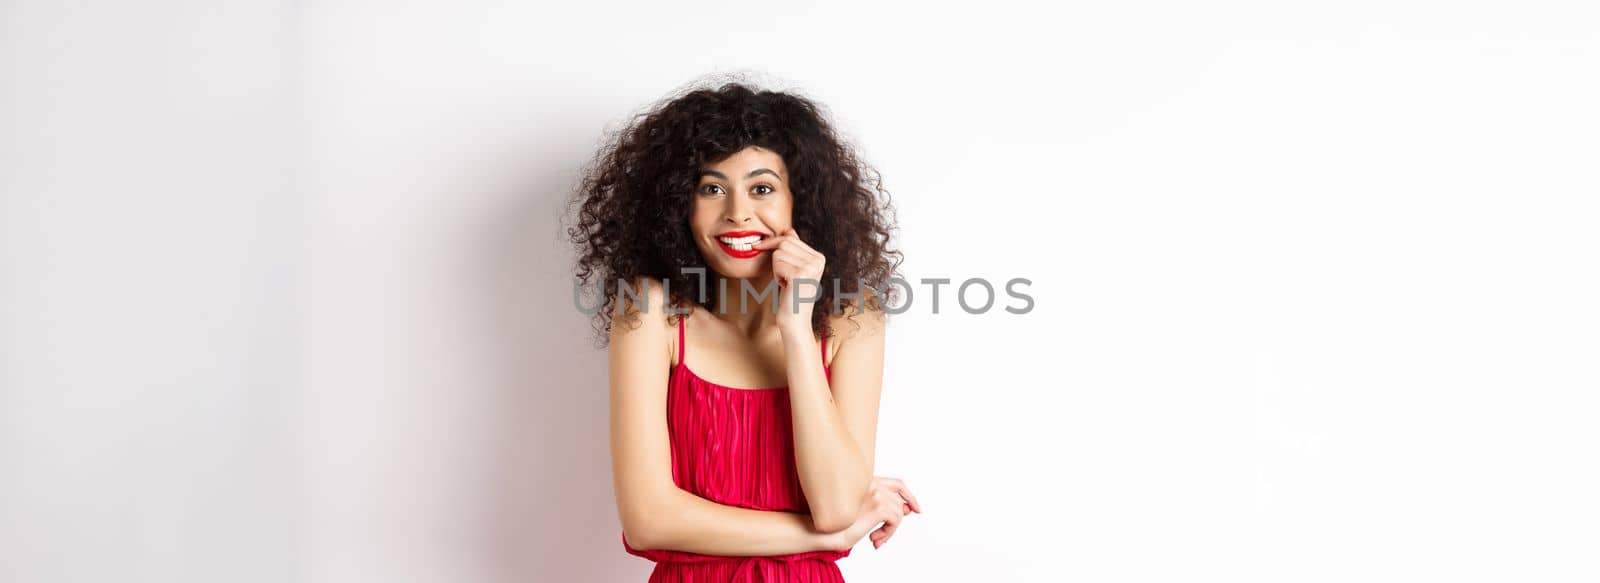 Intrigued young woman with curly hair, wearing elegant red dress and lipstick, biting fingernails and looking interested, standing over white background.